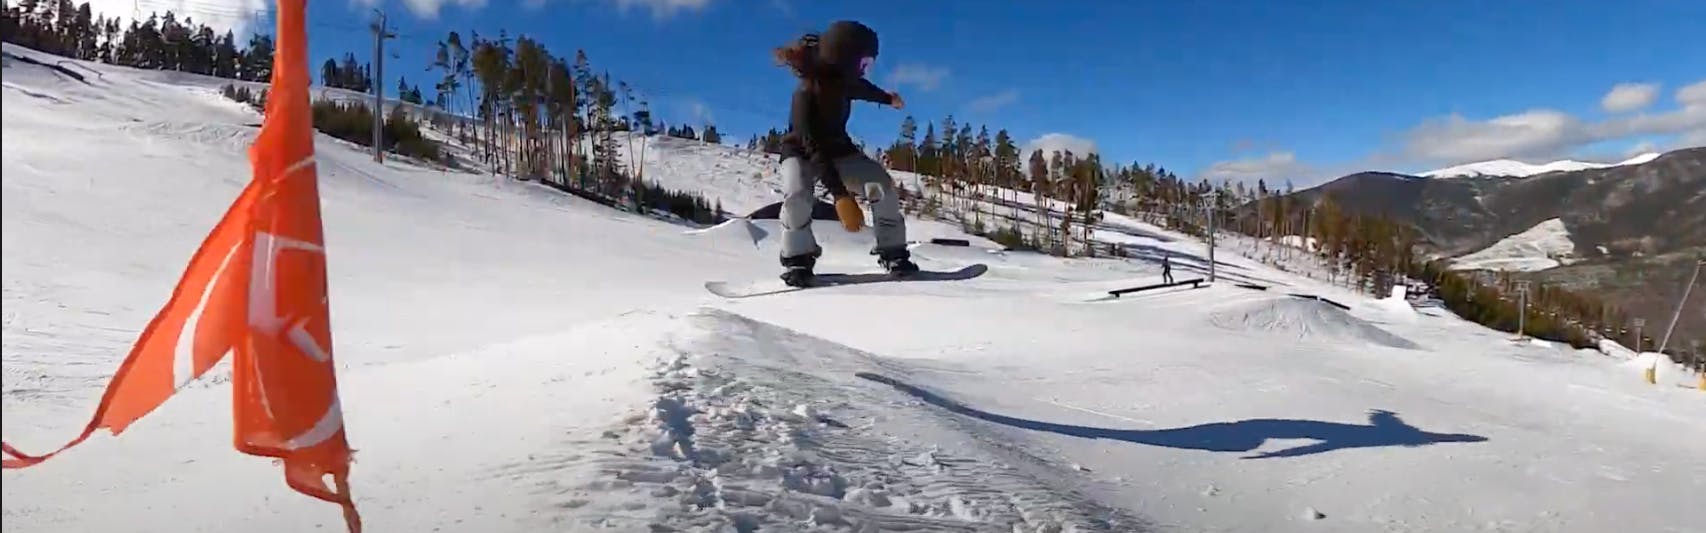 Arielle snowboarding off a jump on a mountain